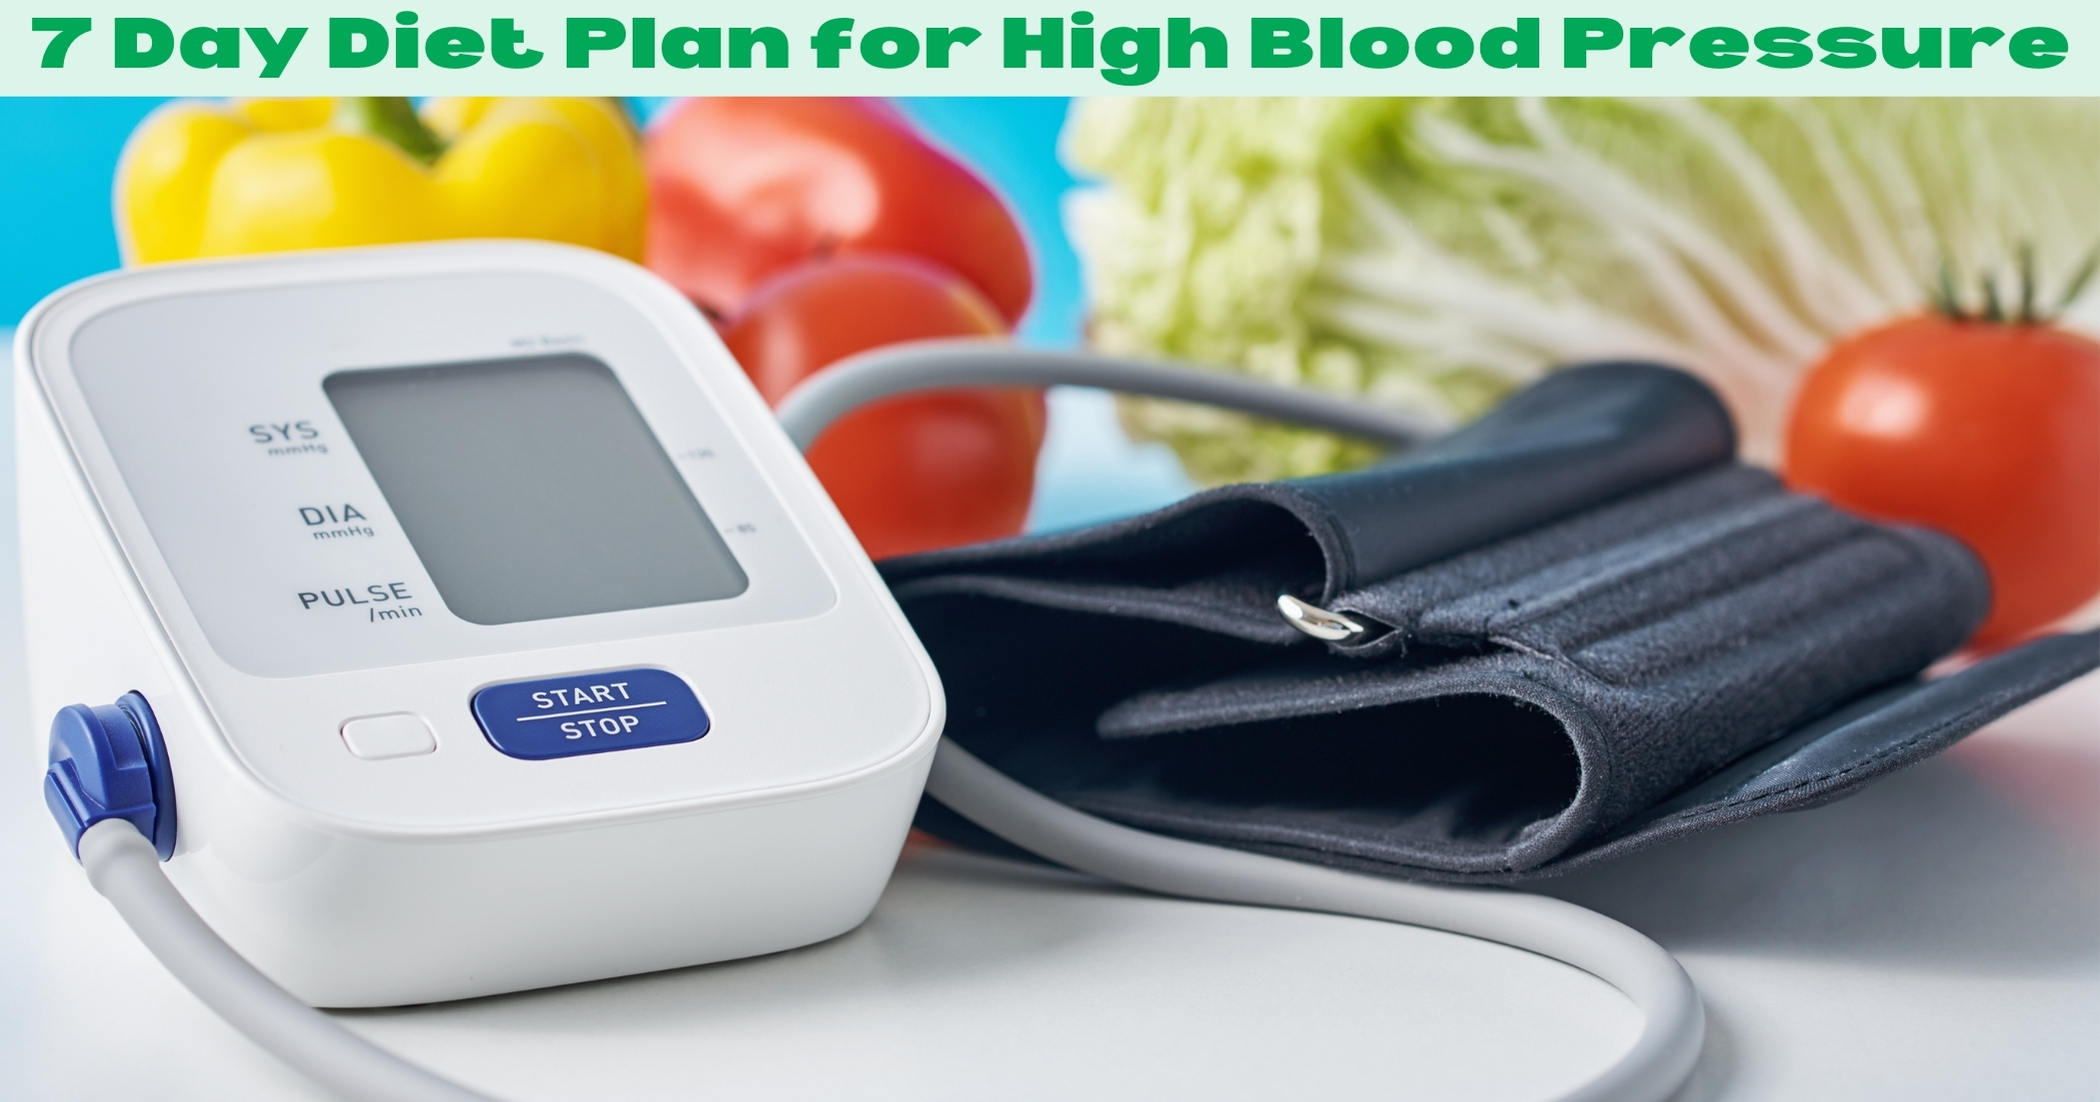 7 Day Diet Plan for High Blood Pressure: Your Path to Better Heart Health